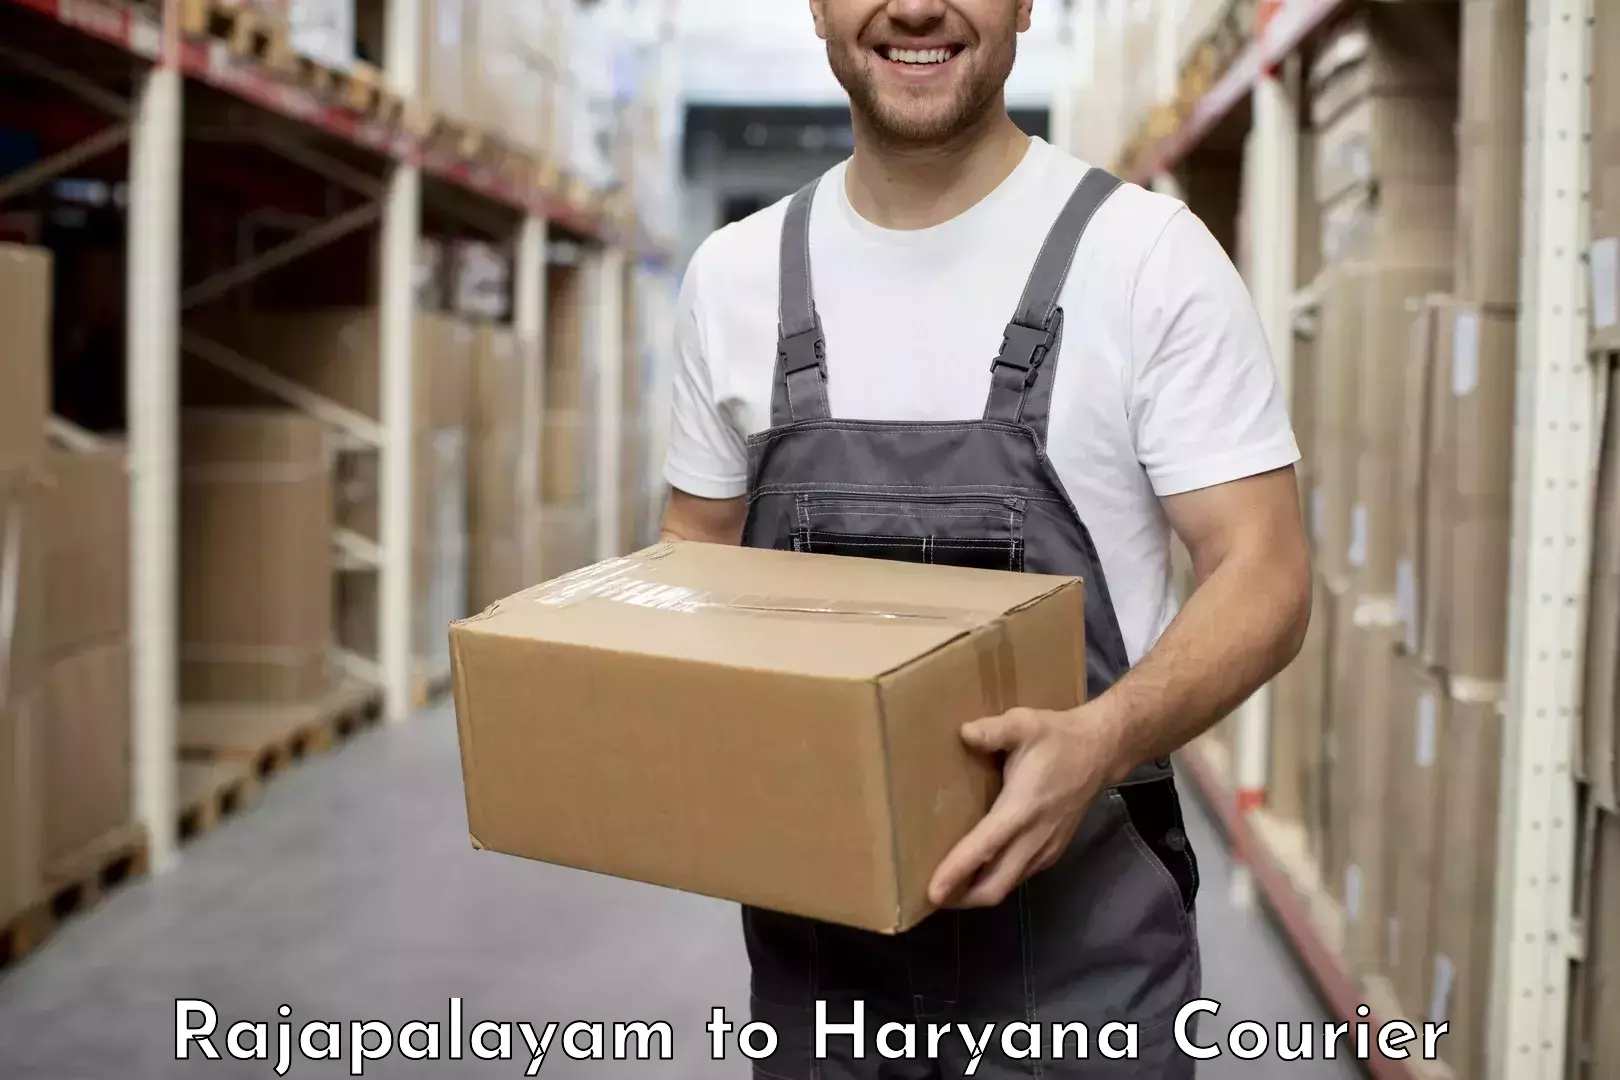 State-of-the-art courier technology Rajapalayam to Sohna